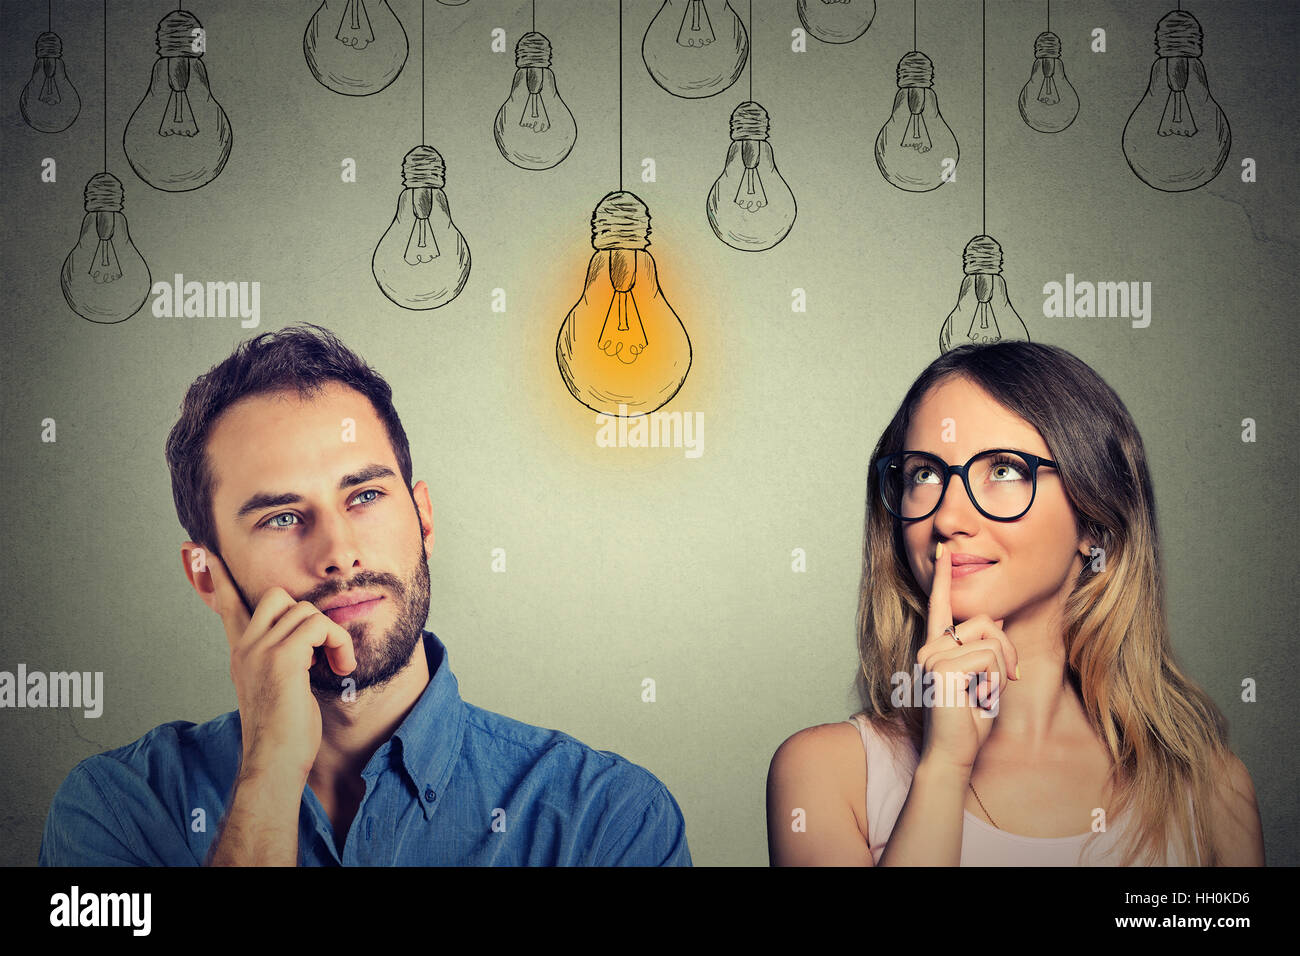 Cognitive skills ability concept, male vs female. Young man and woman looking at bright light bulb isolated on gray background Stock Photo